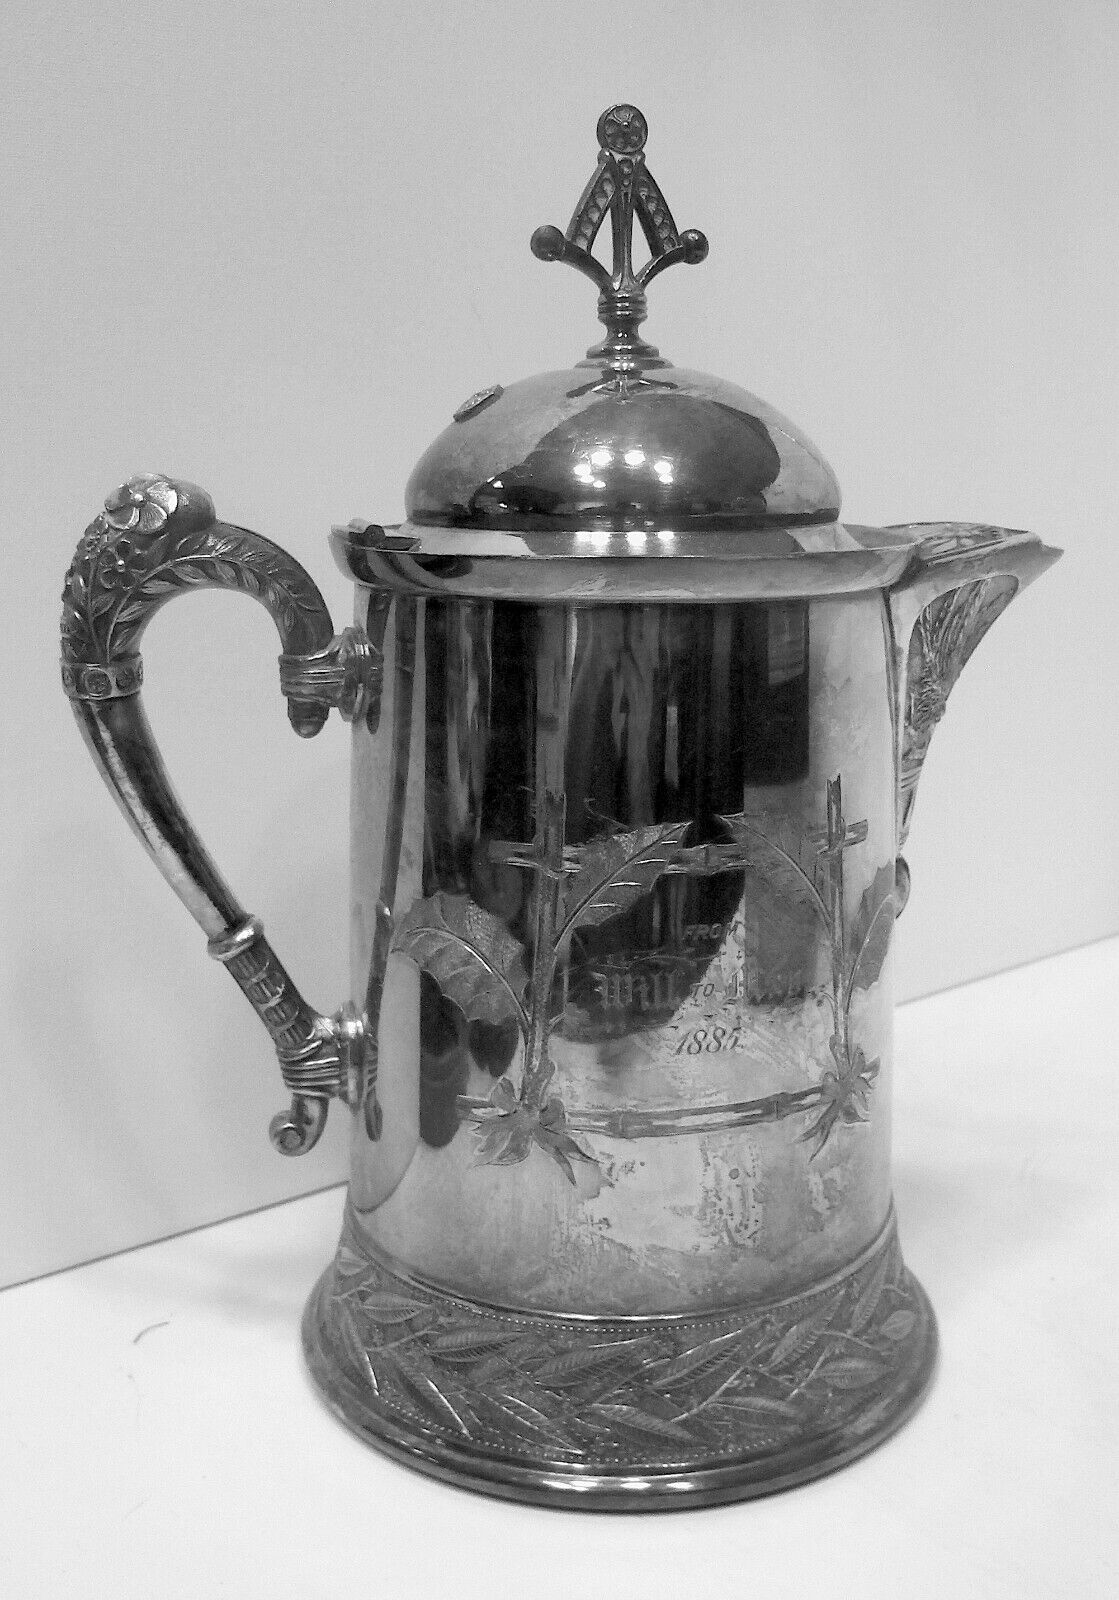 Aesthetic Direct stock discount Dated 1885 - Pairpoint Quadruple Silver Plate Pitcher Jacksonville Mall